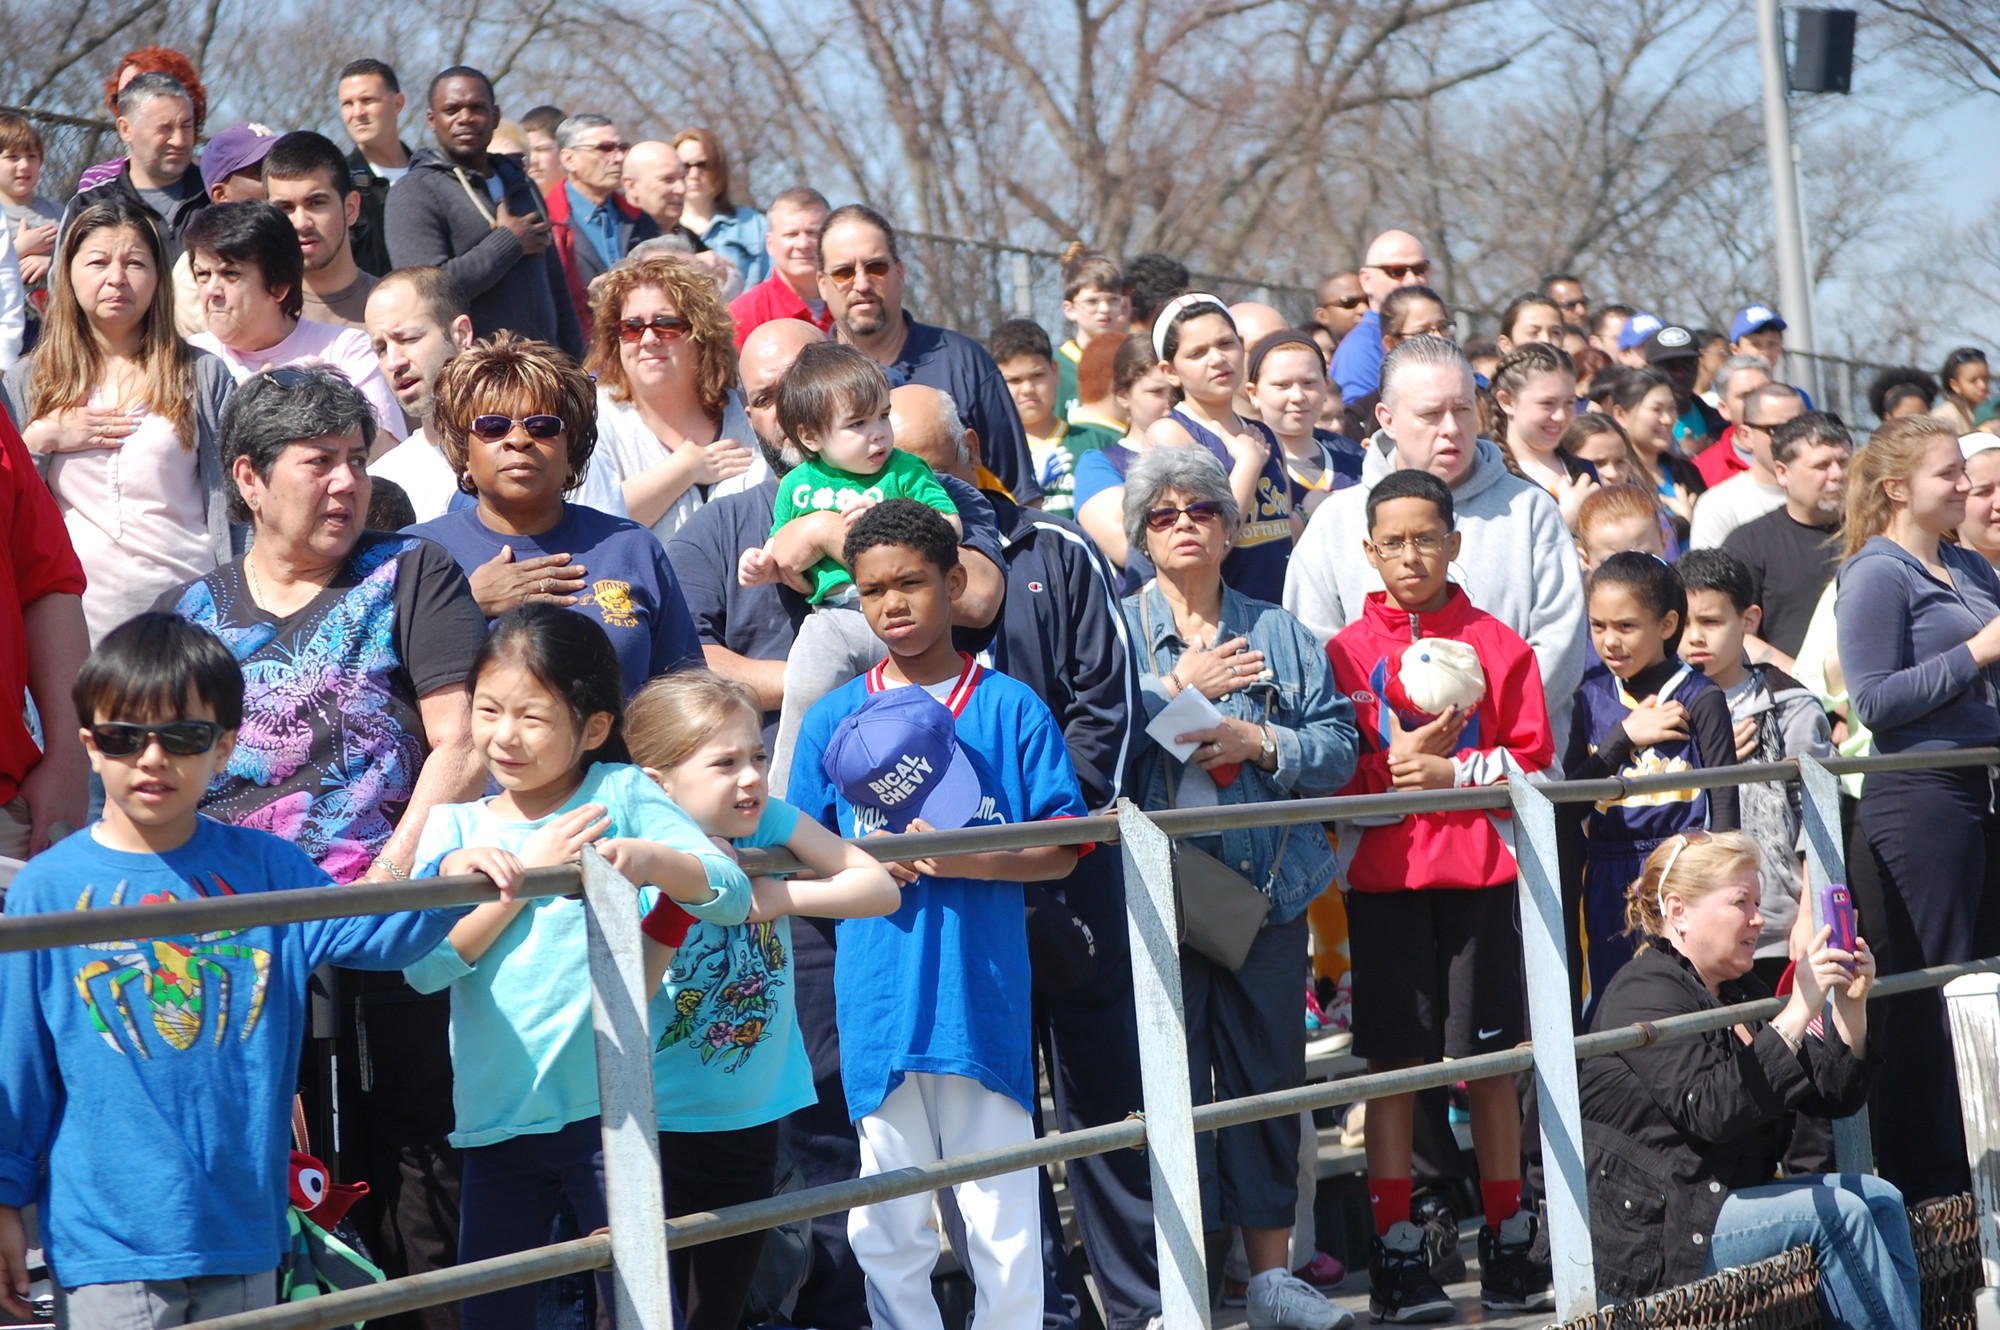 A large crowd gathered at Firemen's Field for the Valley Stream Little League's Opening Day ceremony on April 12.